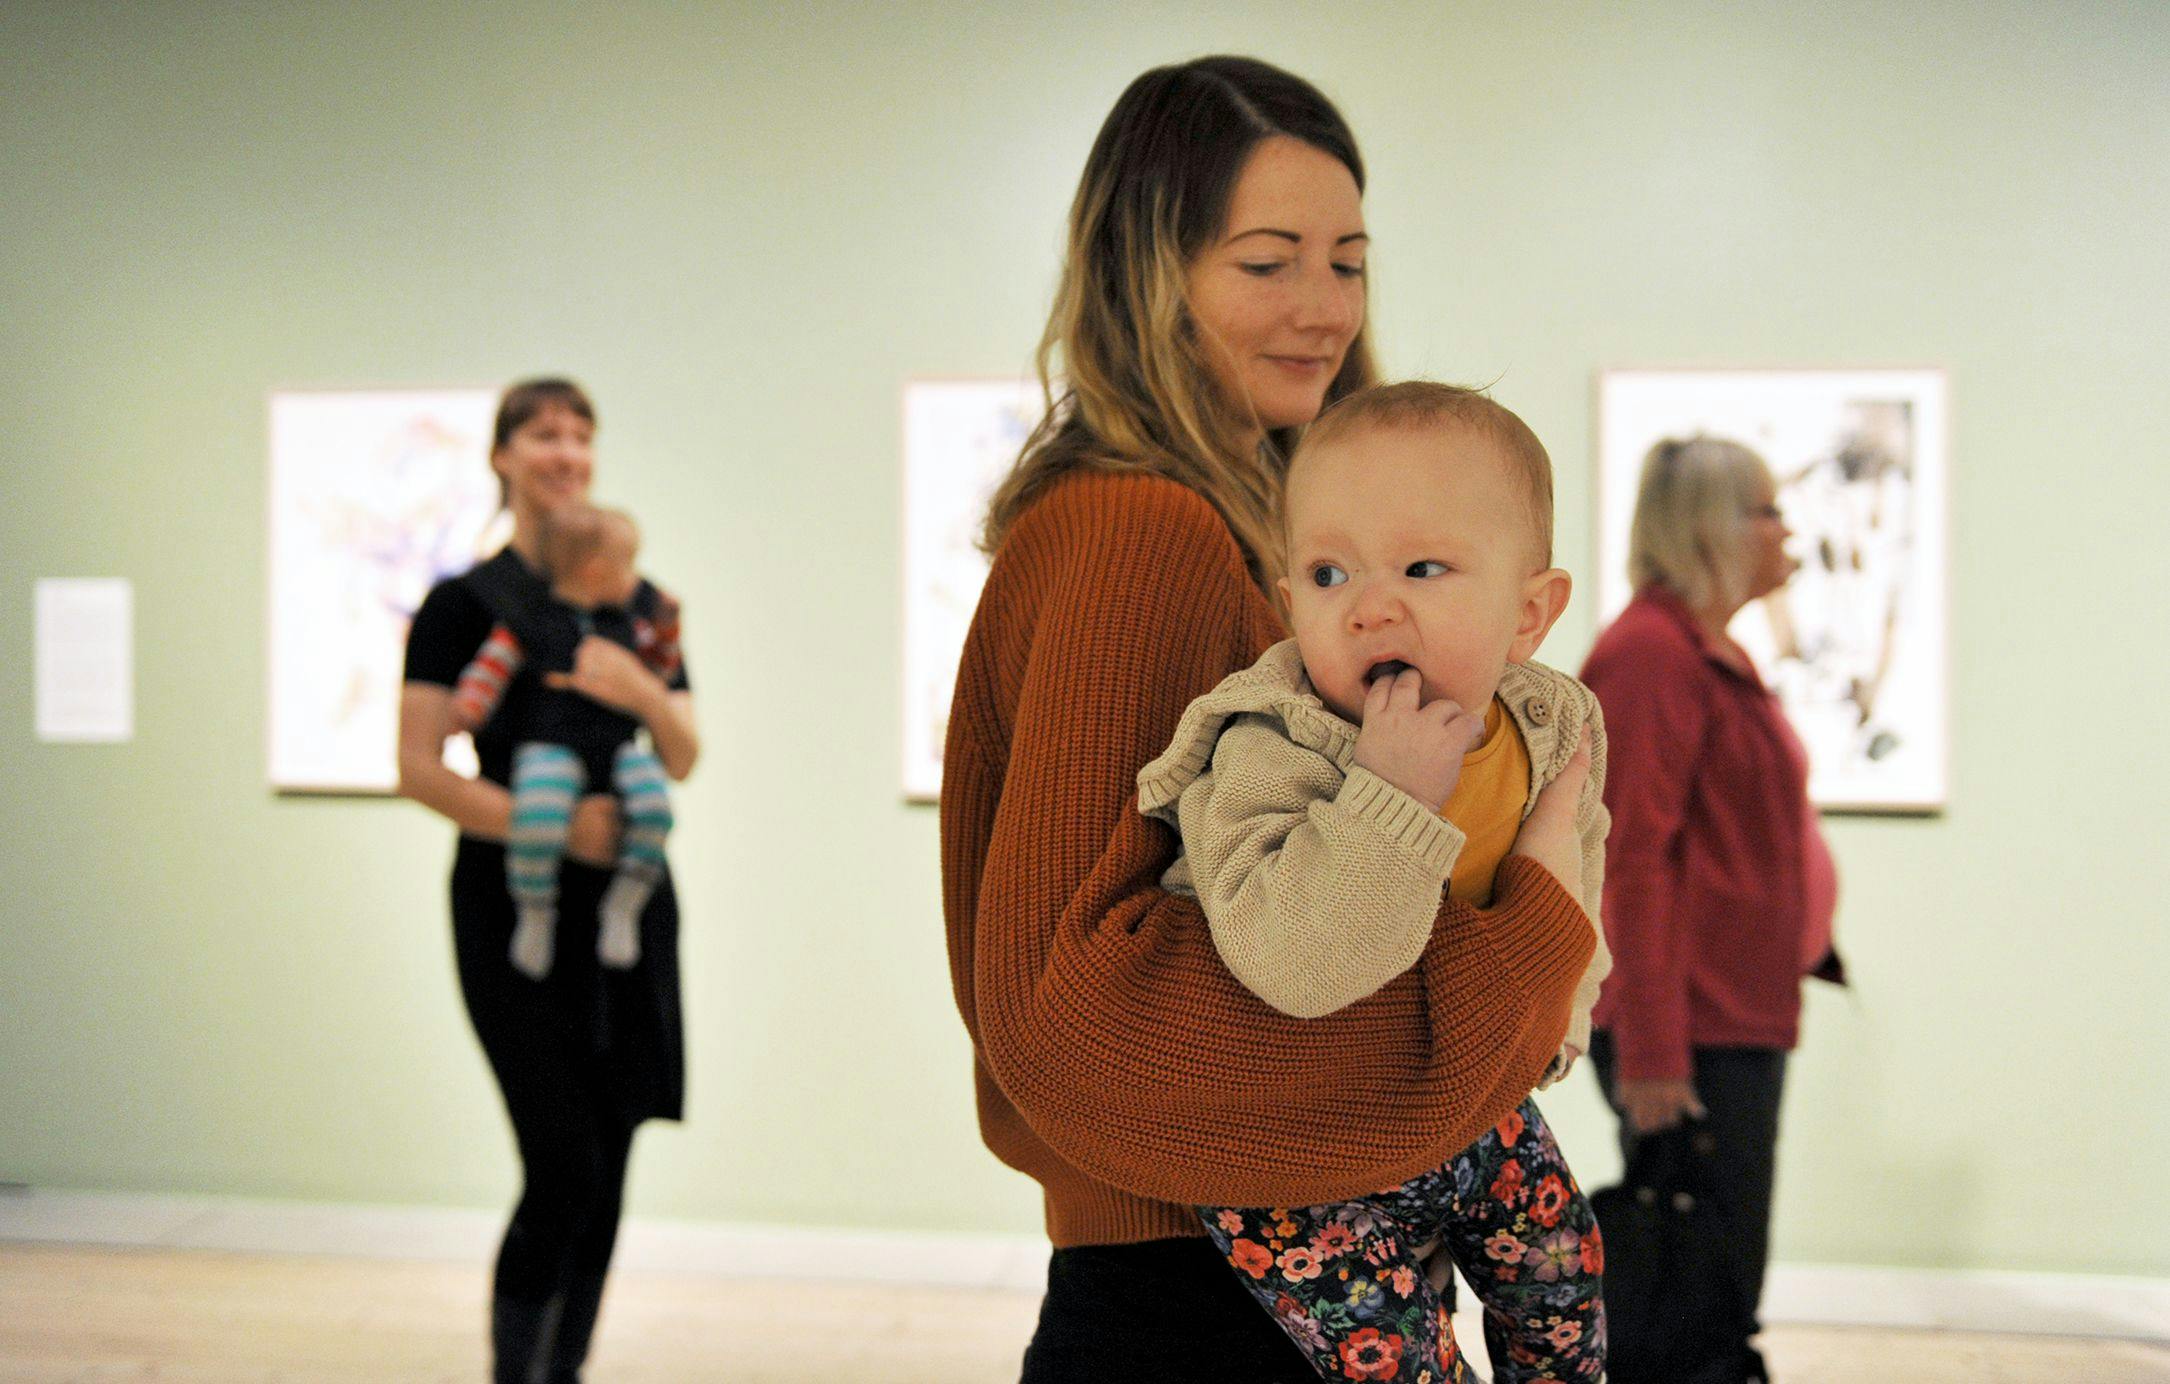 Parents and babies in the exhibition